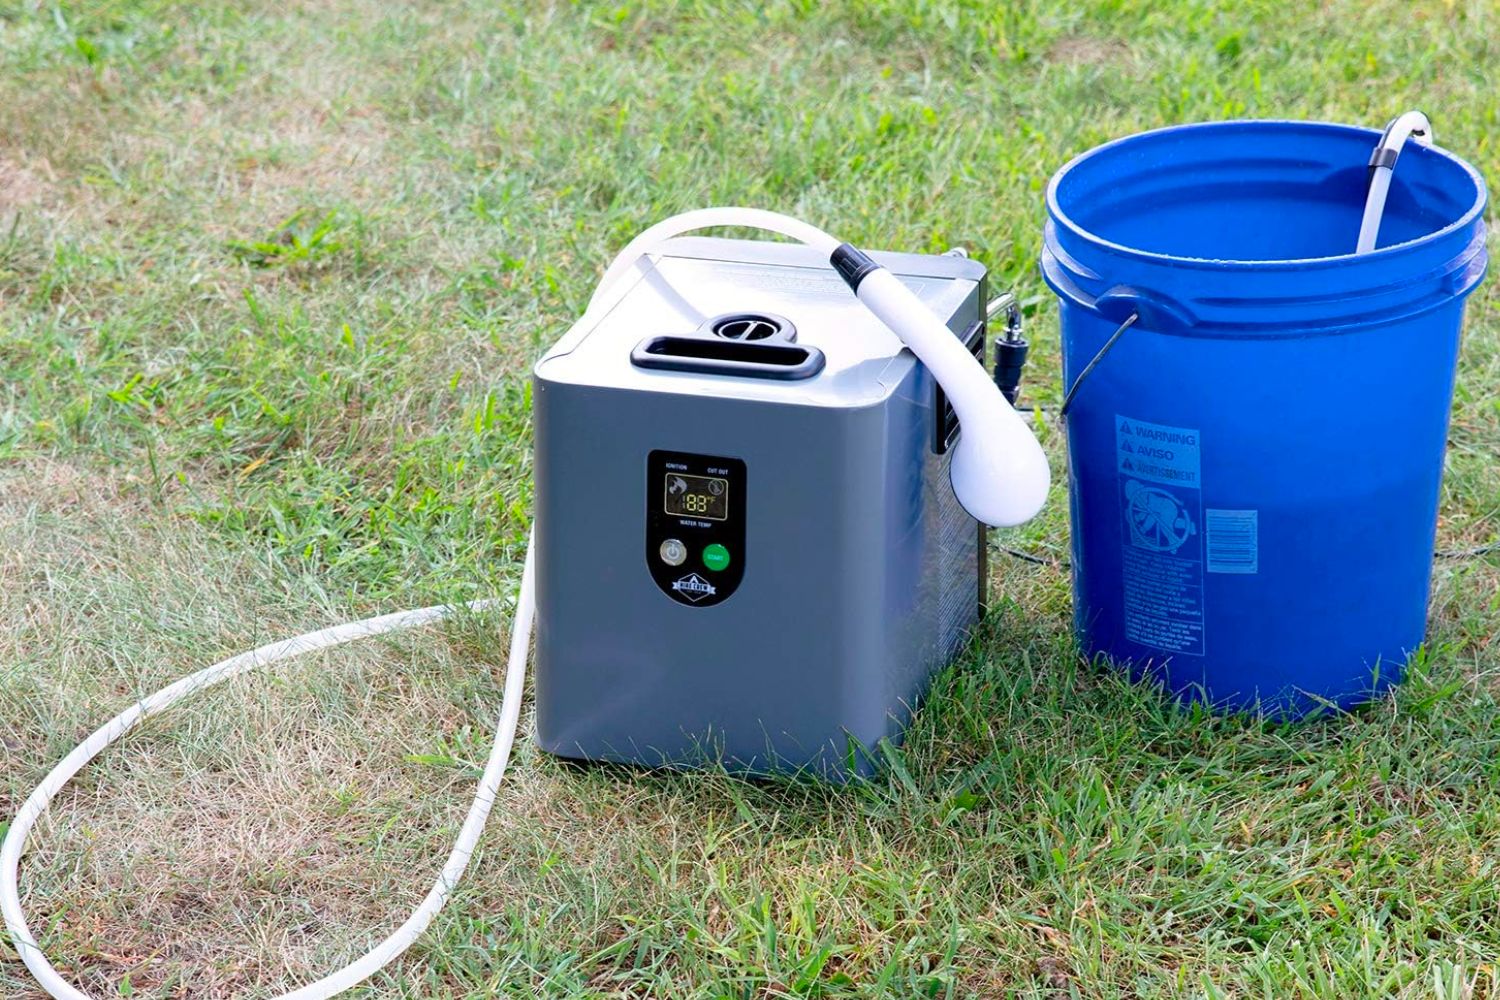 The best propane tankless water heater option on the ground next to a bucket with a shower hose and head